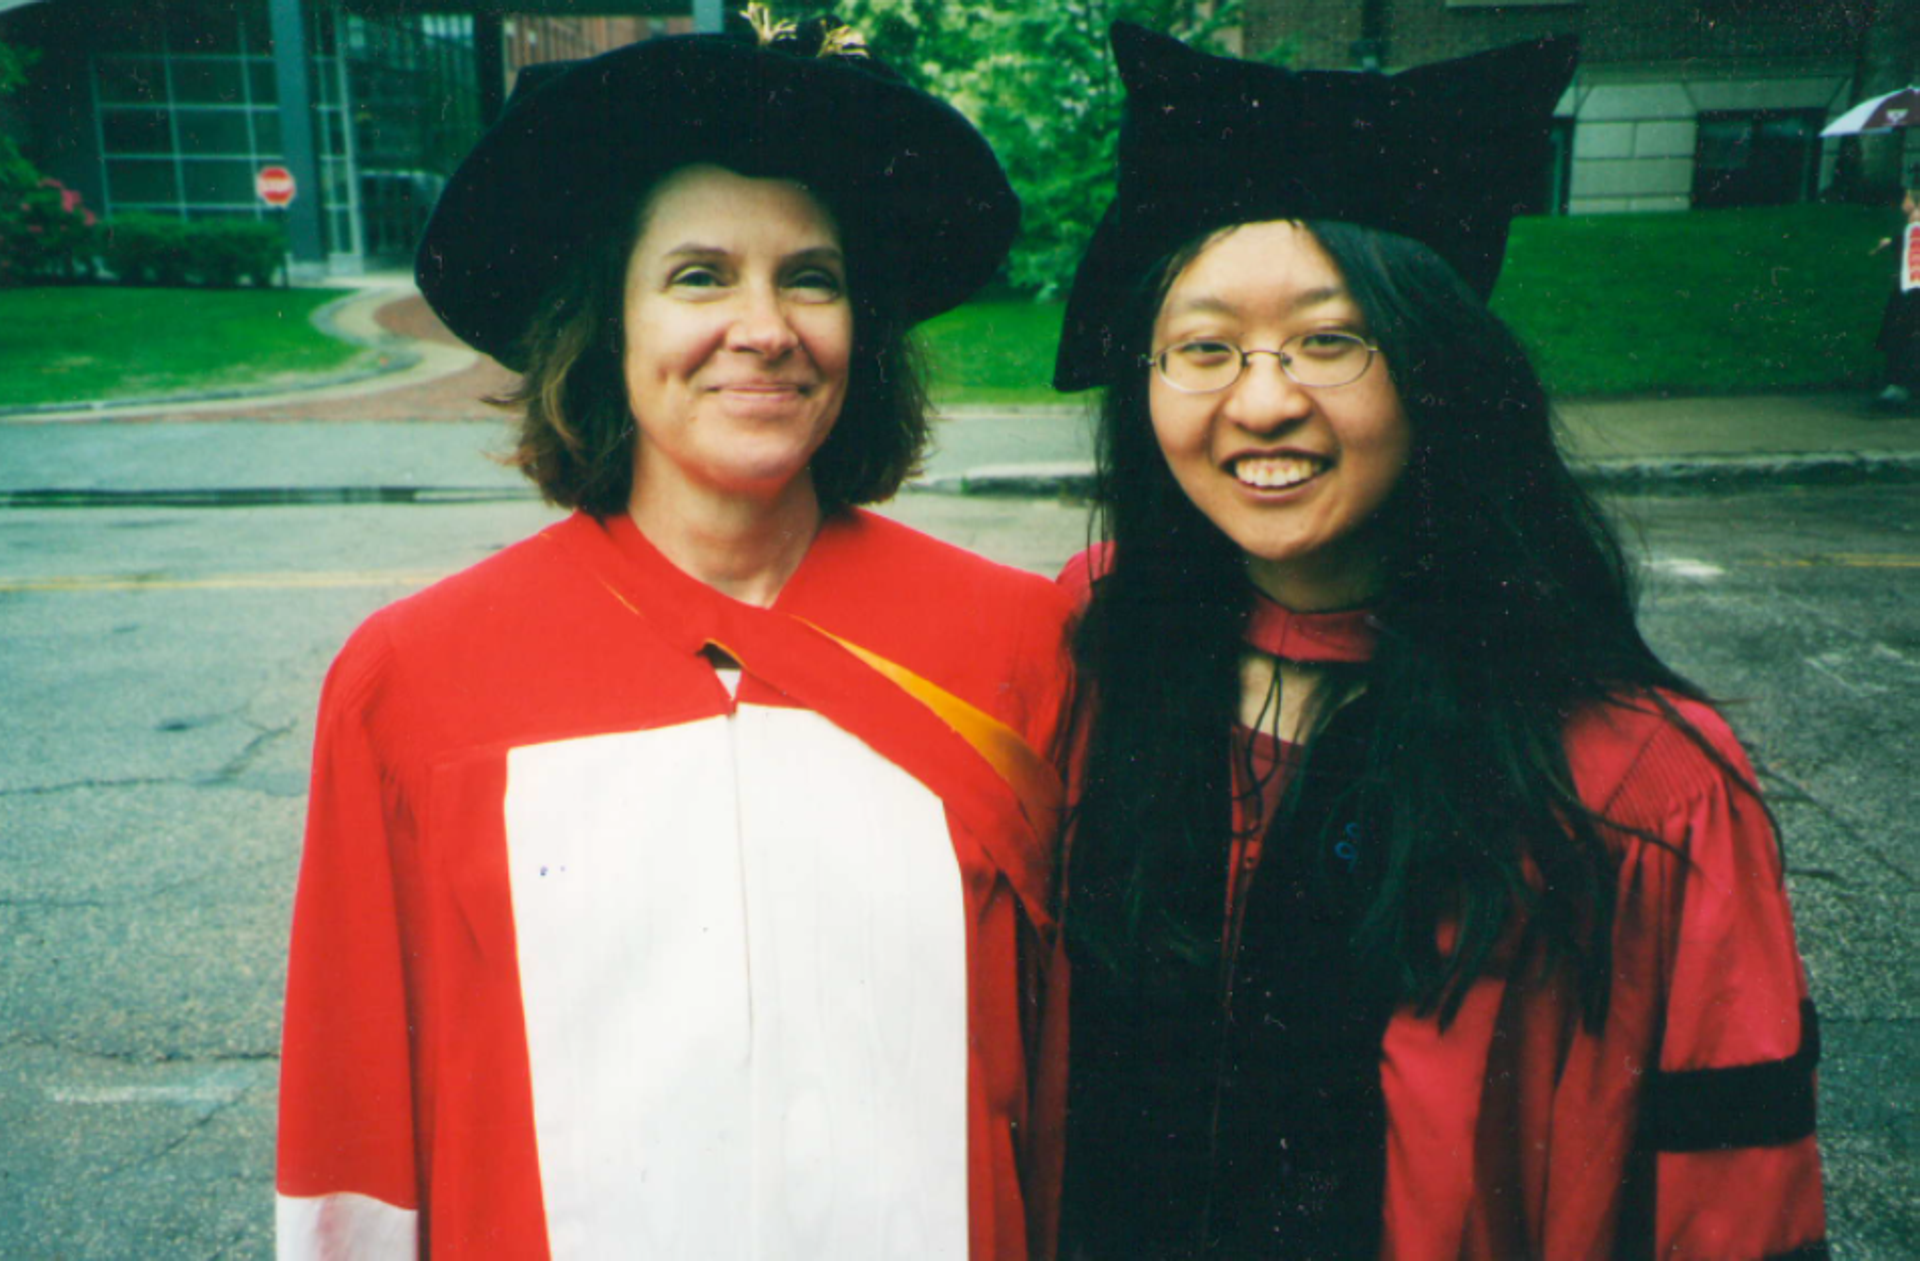 With Marge, Harvard Commencement 2002